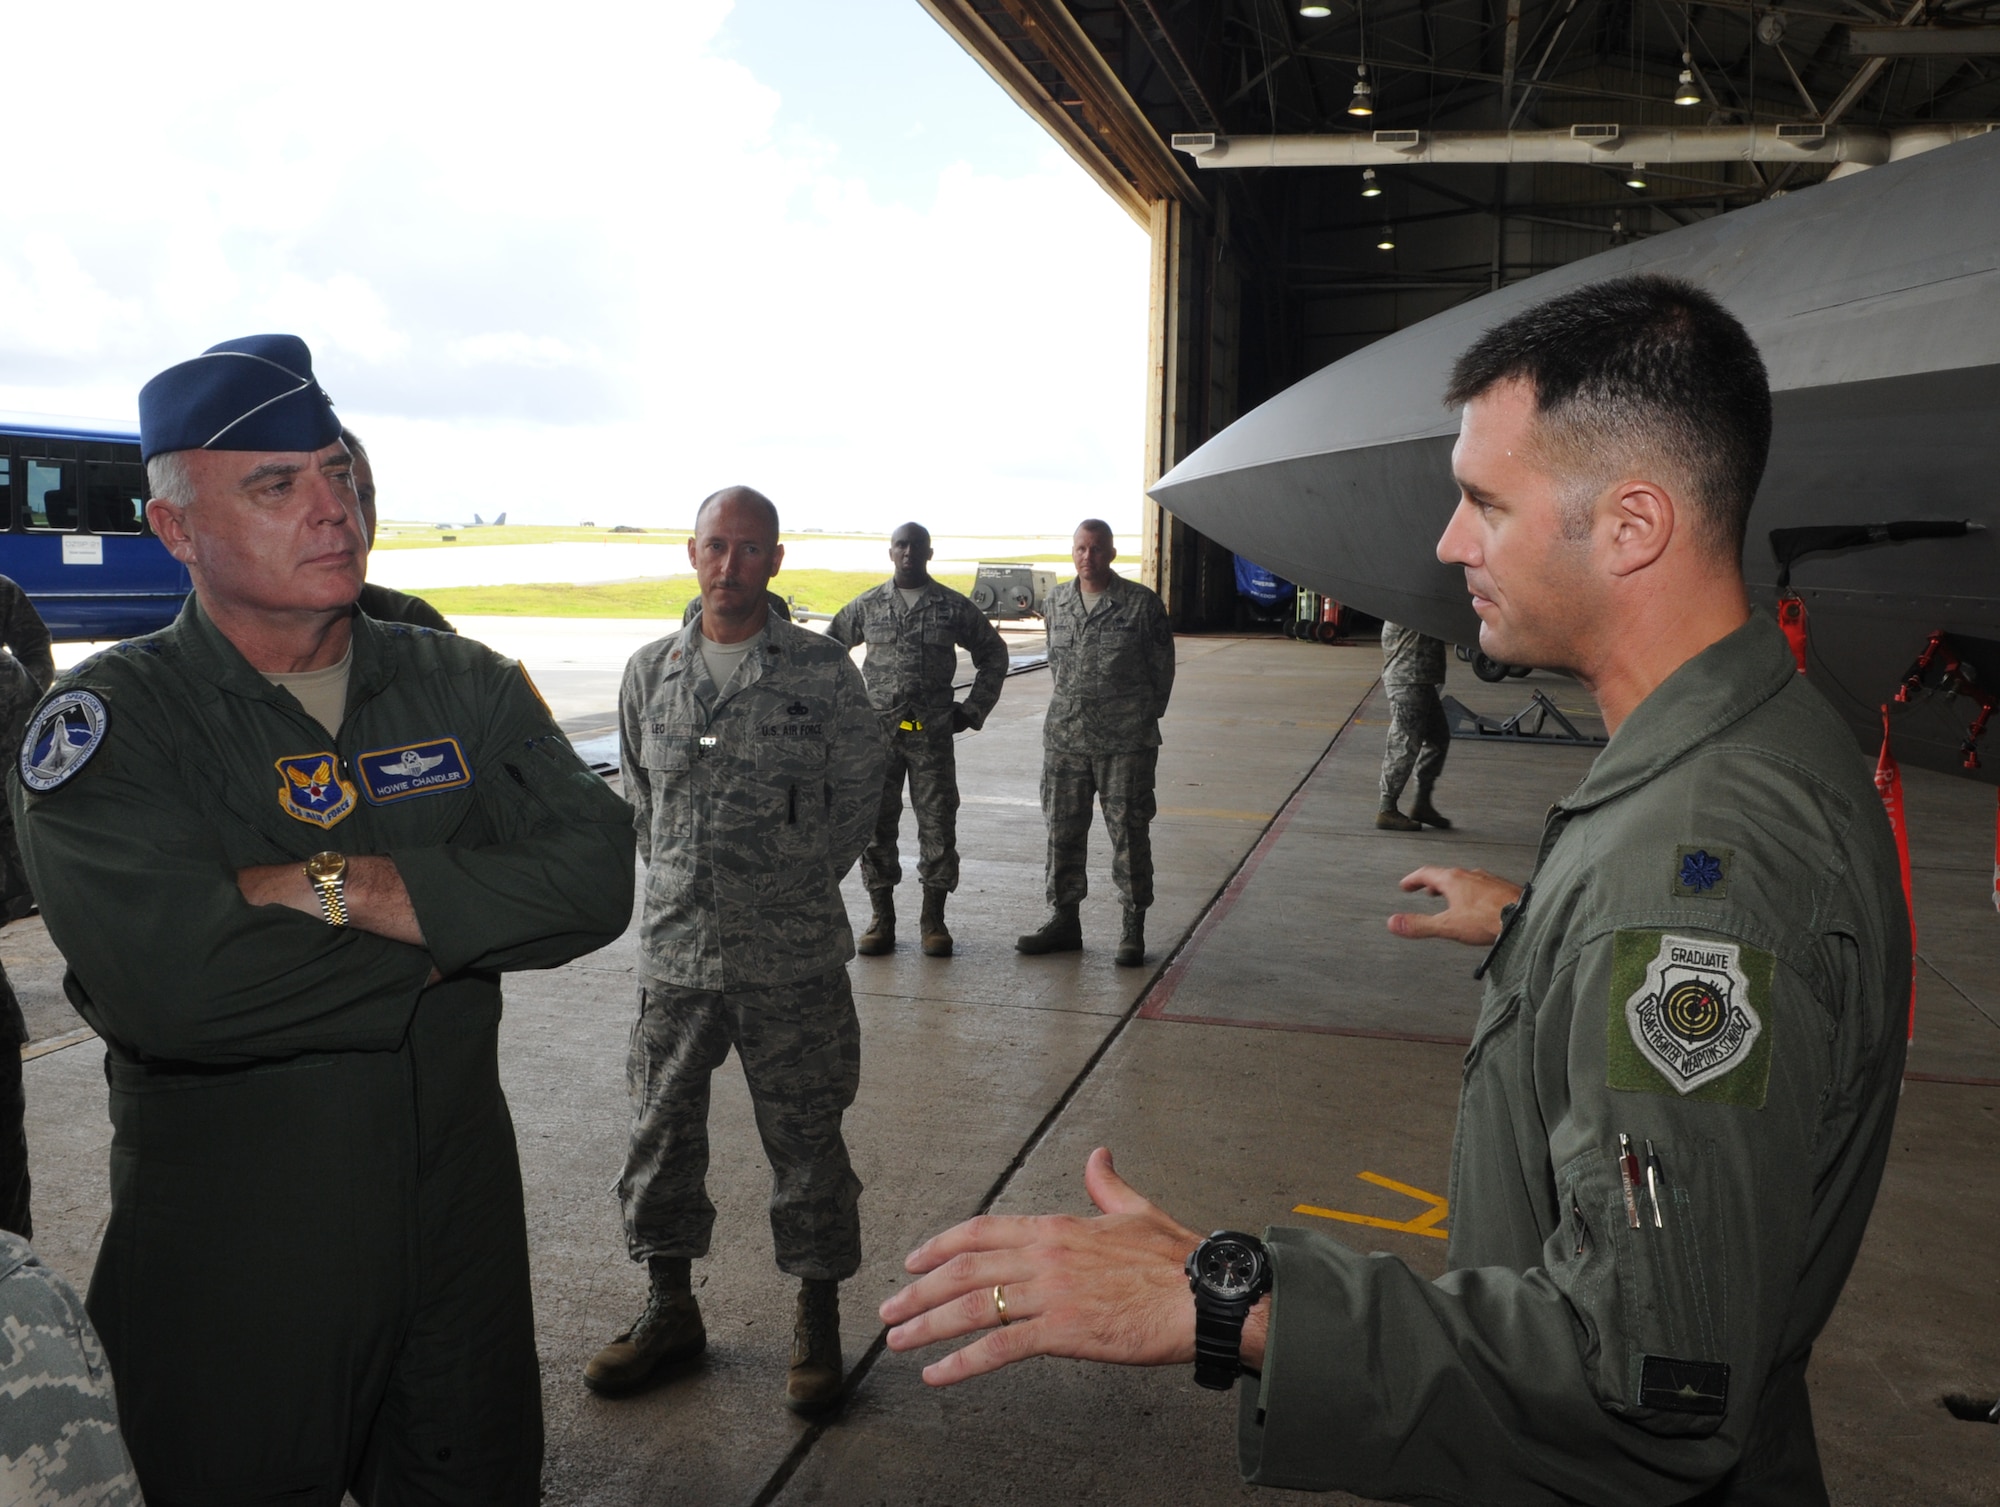 ANDERSEN AIR FORCE BASE, Guam - Lt. Col. Peter Fesler, 27th Expeditionary Fighter Squadron commander, discusses F-22 Raptor operations at Andersen Air Force Base, Guam, with Air Force Vice Chief of Staff Gen. Carrol ?Howie? Chandler on Aug. 3, 2010.  General Chandler stopped at Andersen while traveling through the Pacific region.  He was accompanied on his visit by Pacific Air Forces Vice Commander Maj. Gen. Douglas Owens, a former 36th Wing commander. (U.S. Air Force photo/Tech. Sgt. Mike Andriacco)